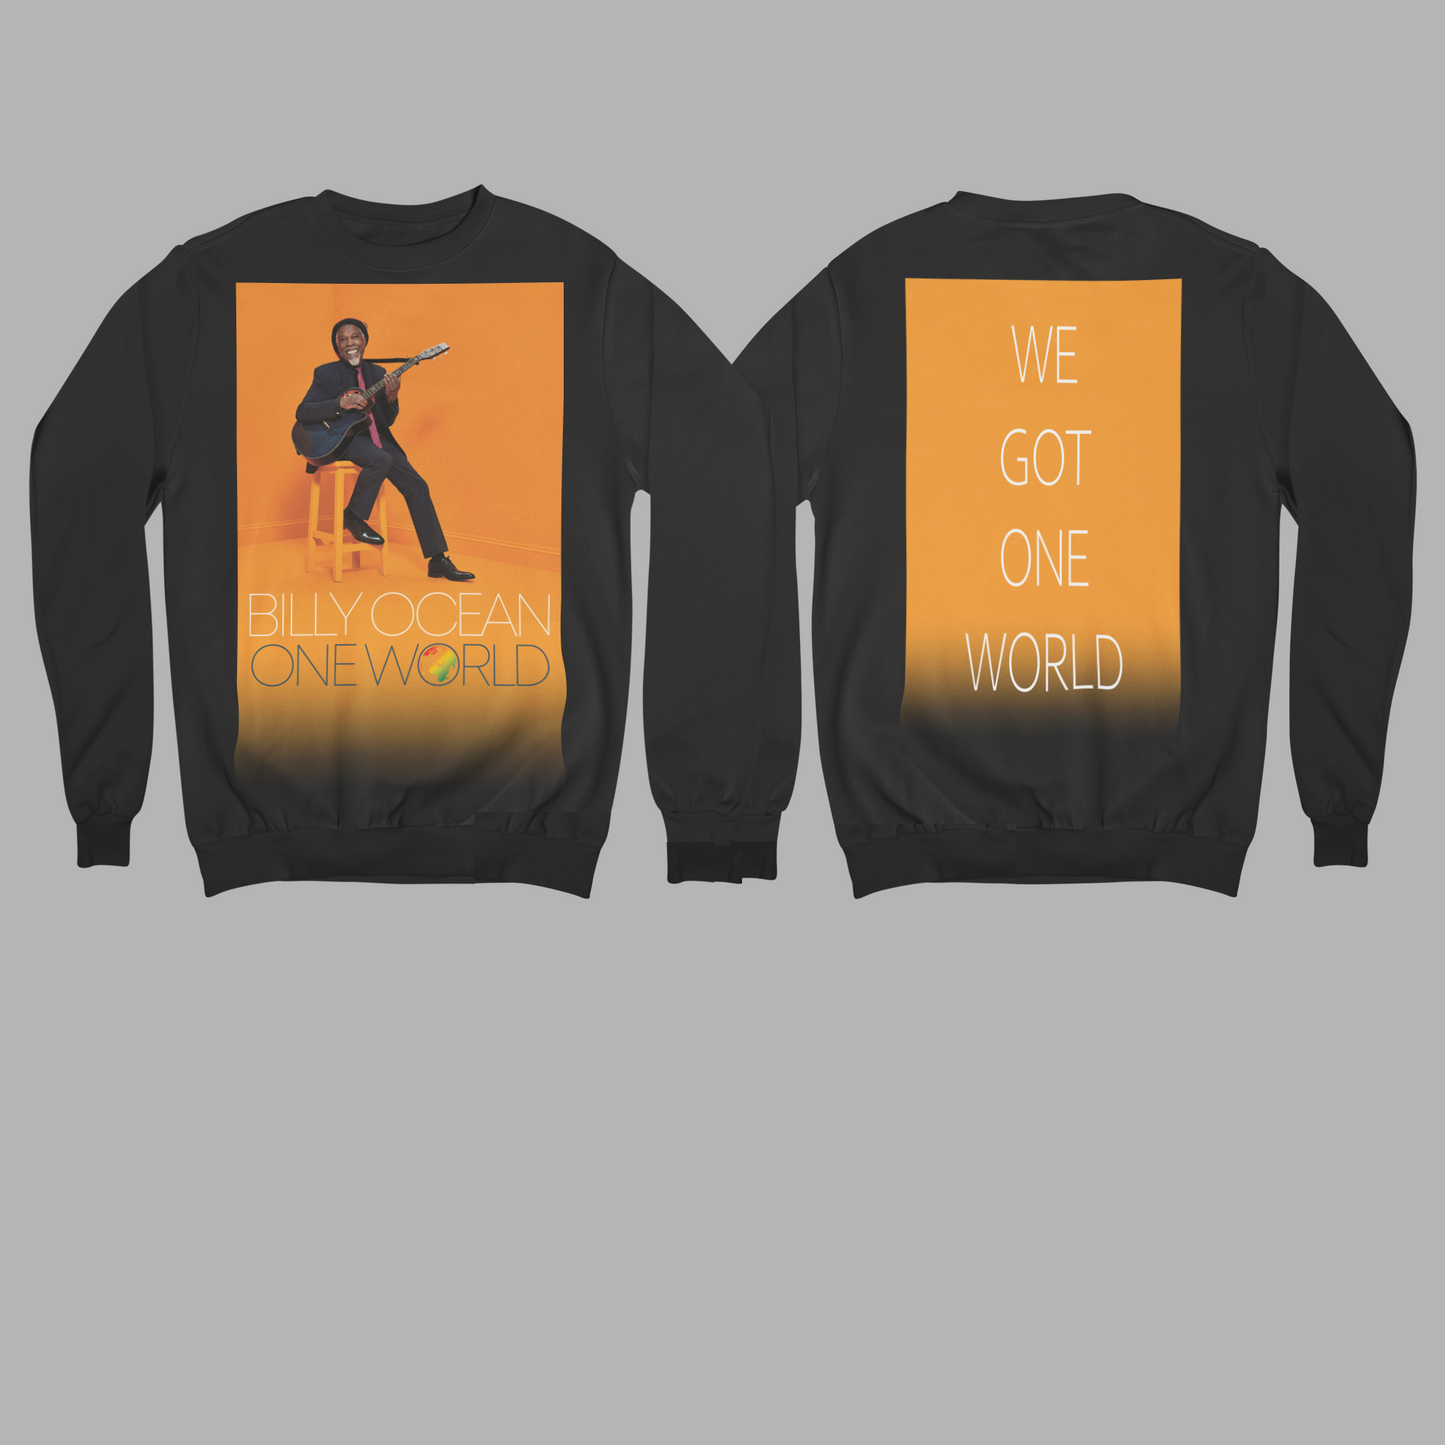 'ONE WORLD' - EXPLODED SWEATSHIRT FRONT AND BACK PRINT